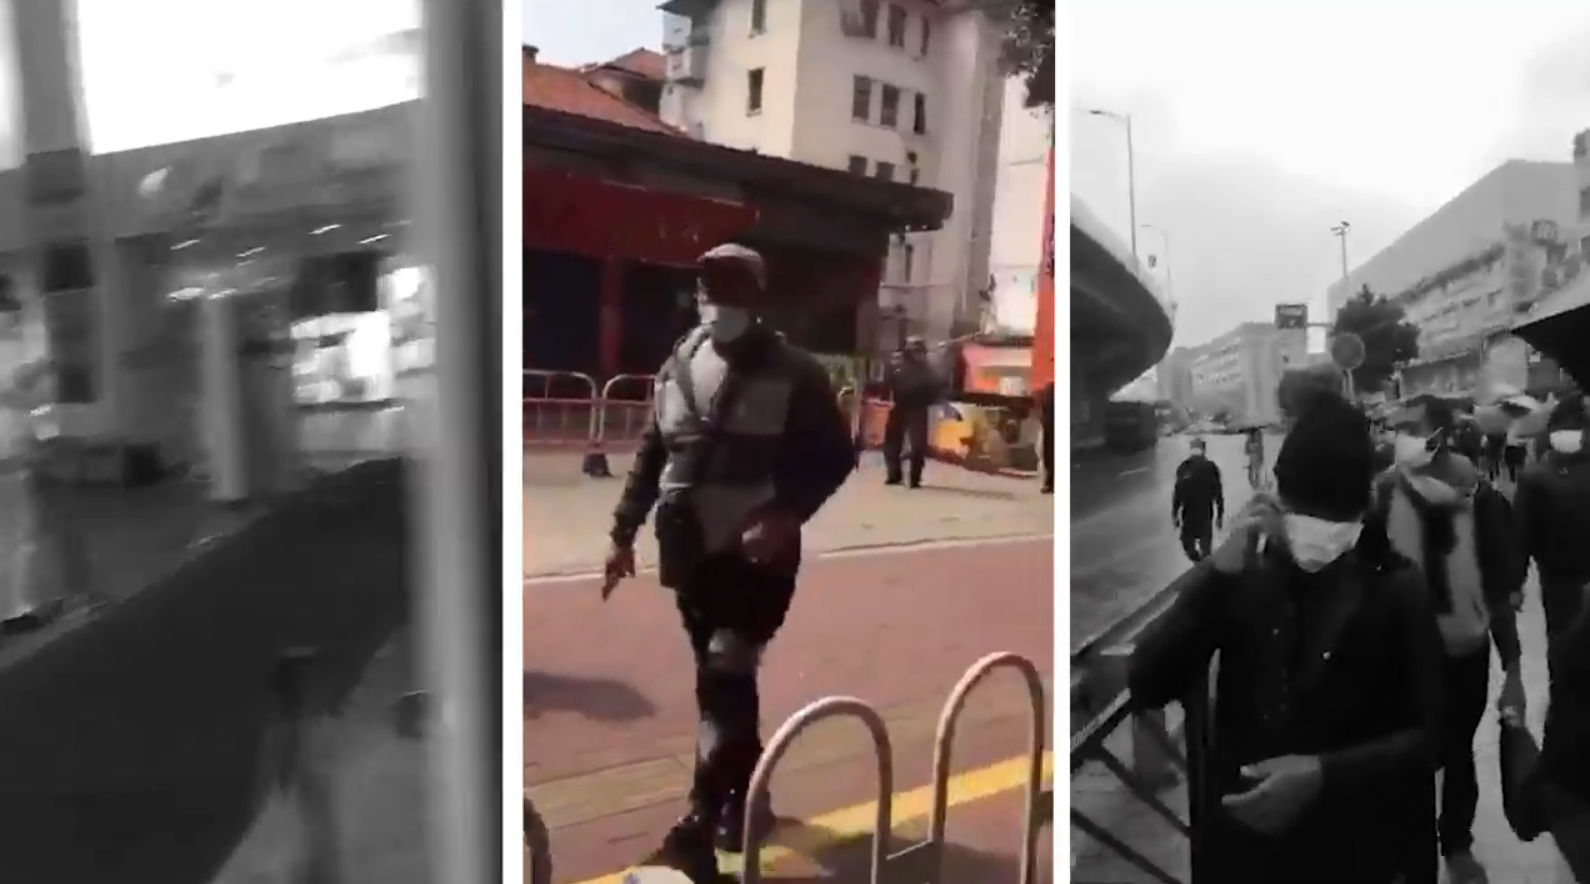 Three eyewitness videos that document anti-Black discrimination in China shown side-by-side